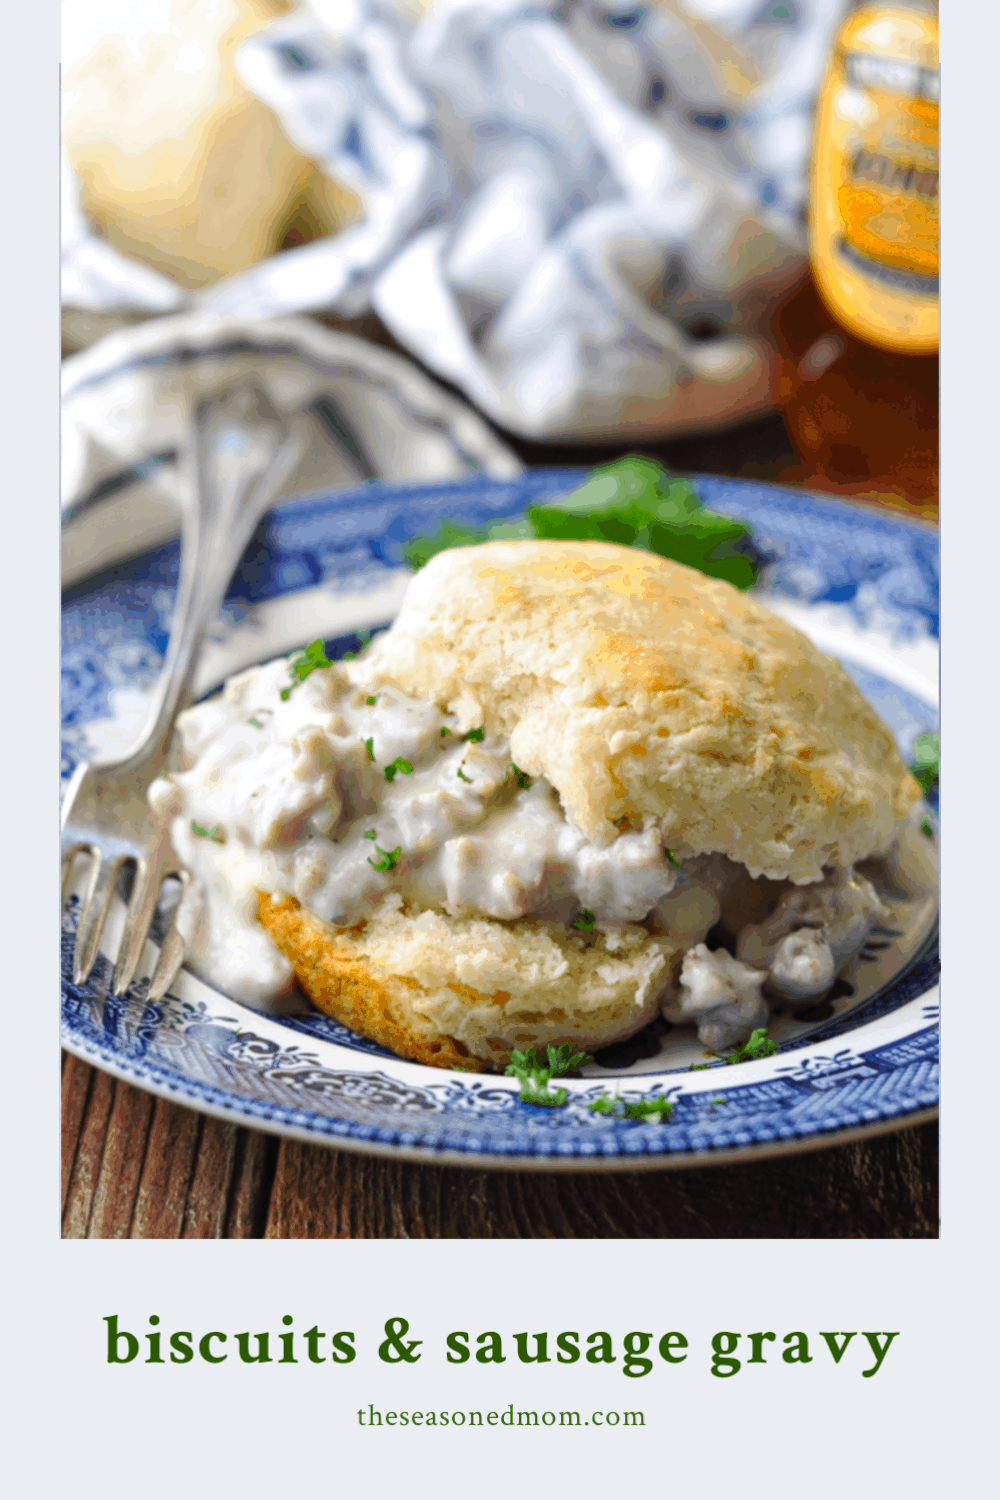 Biscuits and Sausage Gravy at The Seasoned Mom